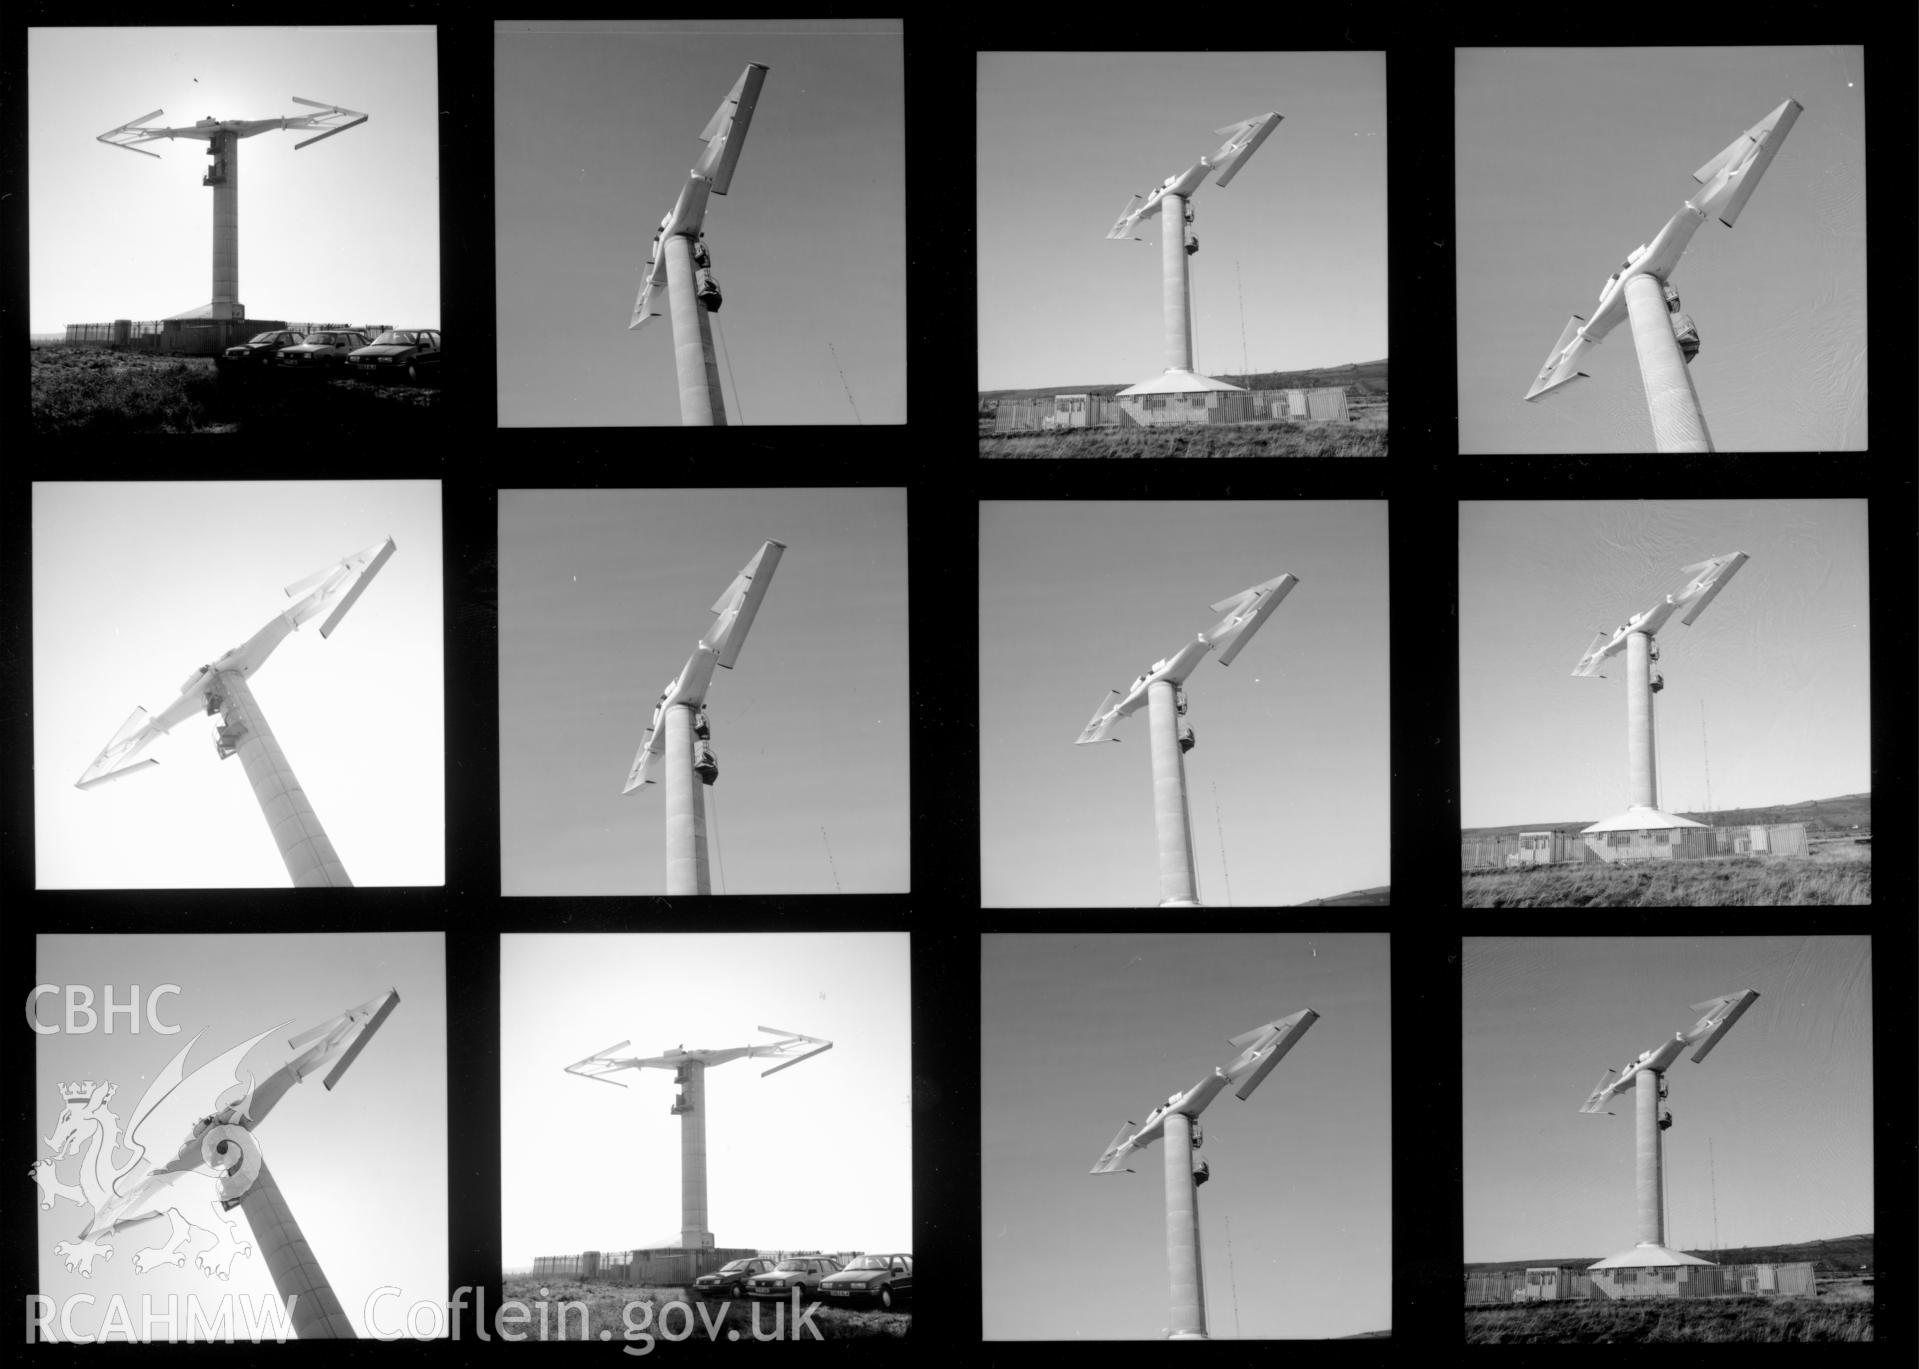 Contact sheet 3c of views of the prototype wind turbine at Carmarthen Bay in 1986. From the Central Office of Information Collection.